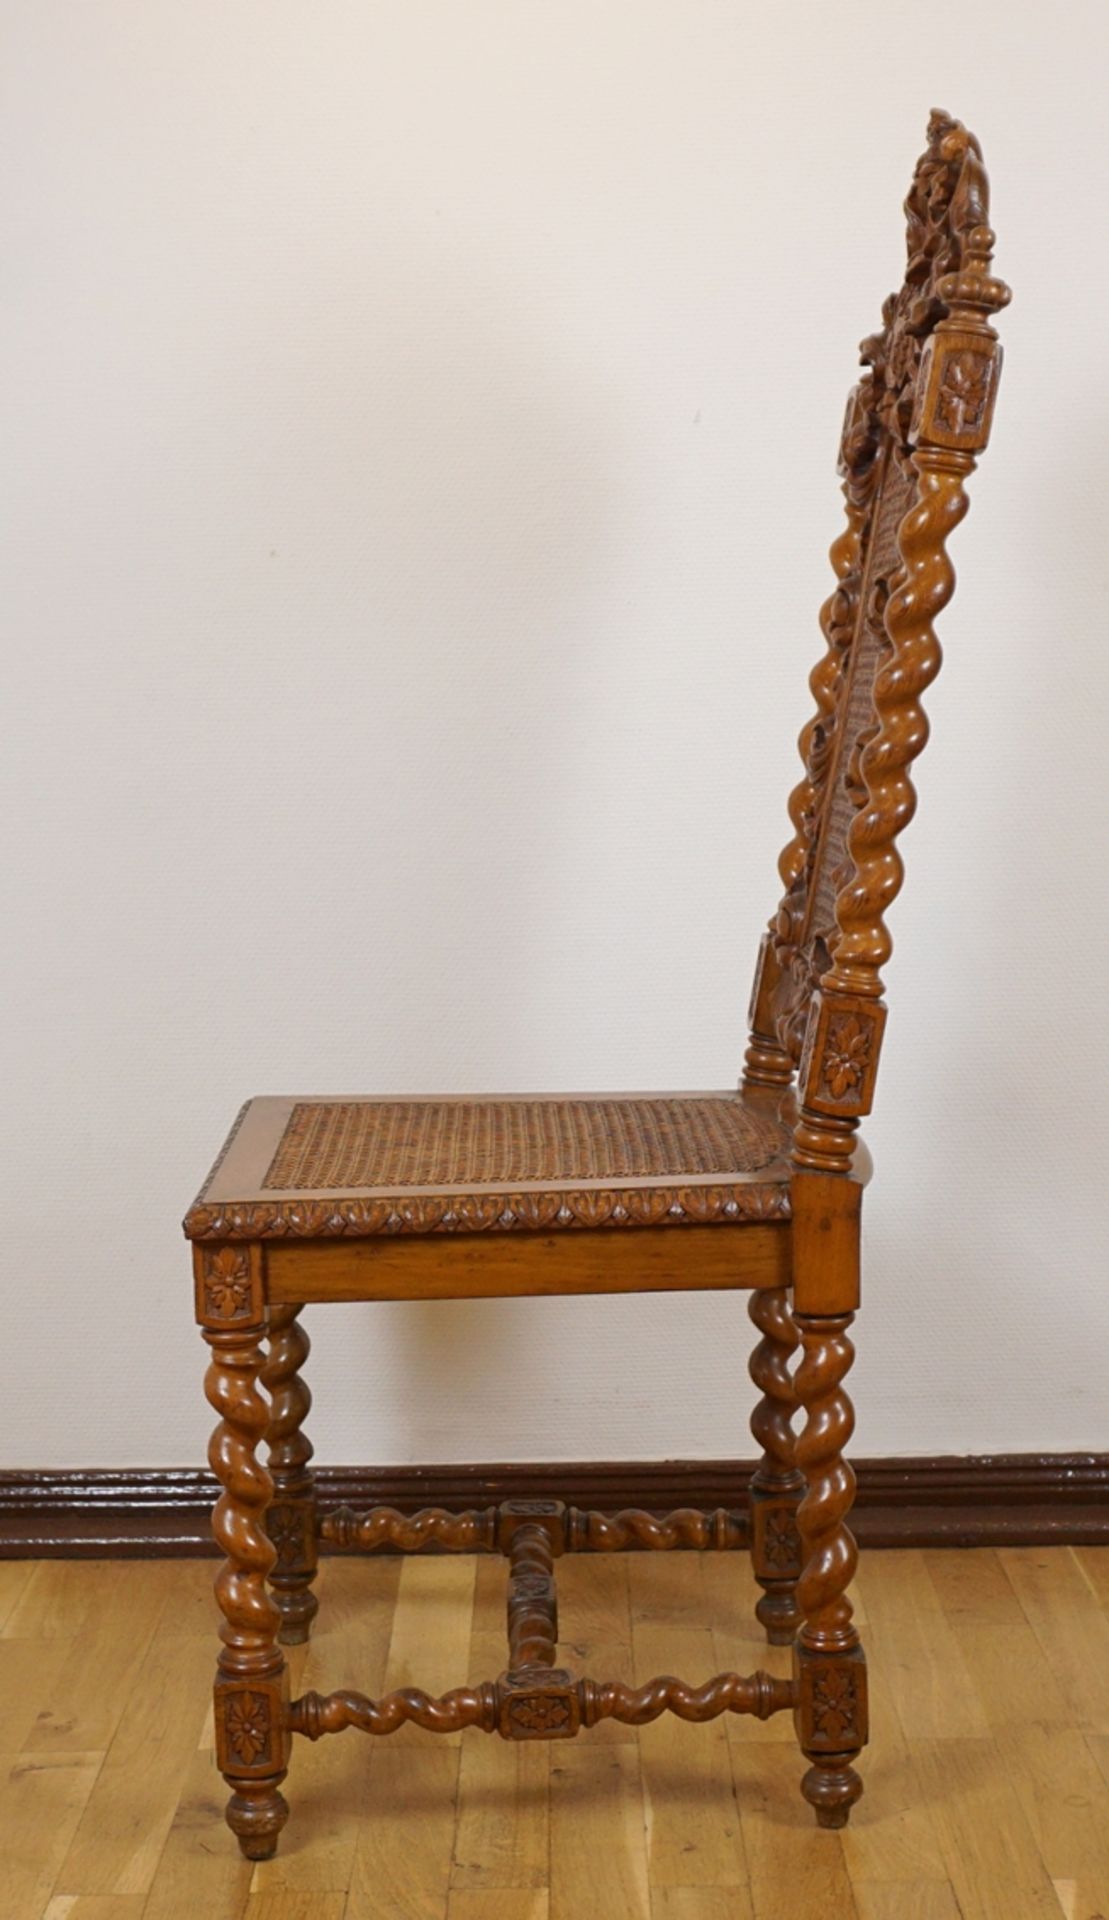 Historicism chair with coats of arms, end of 19th century - Image 5 of 5